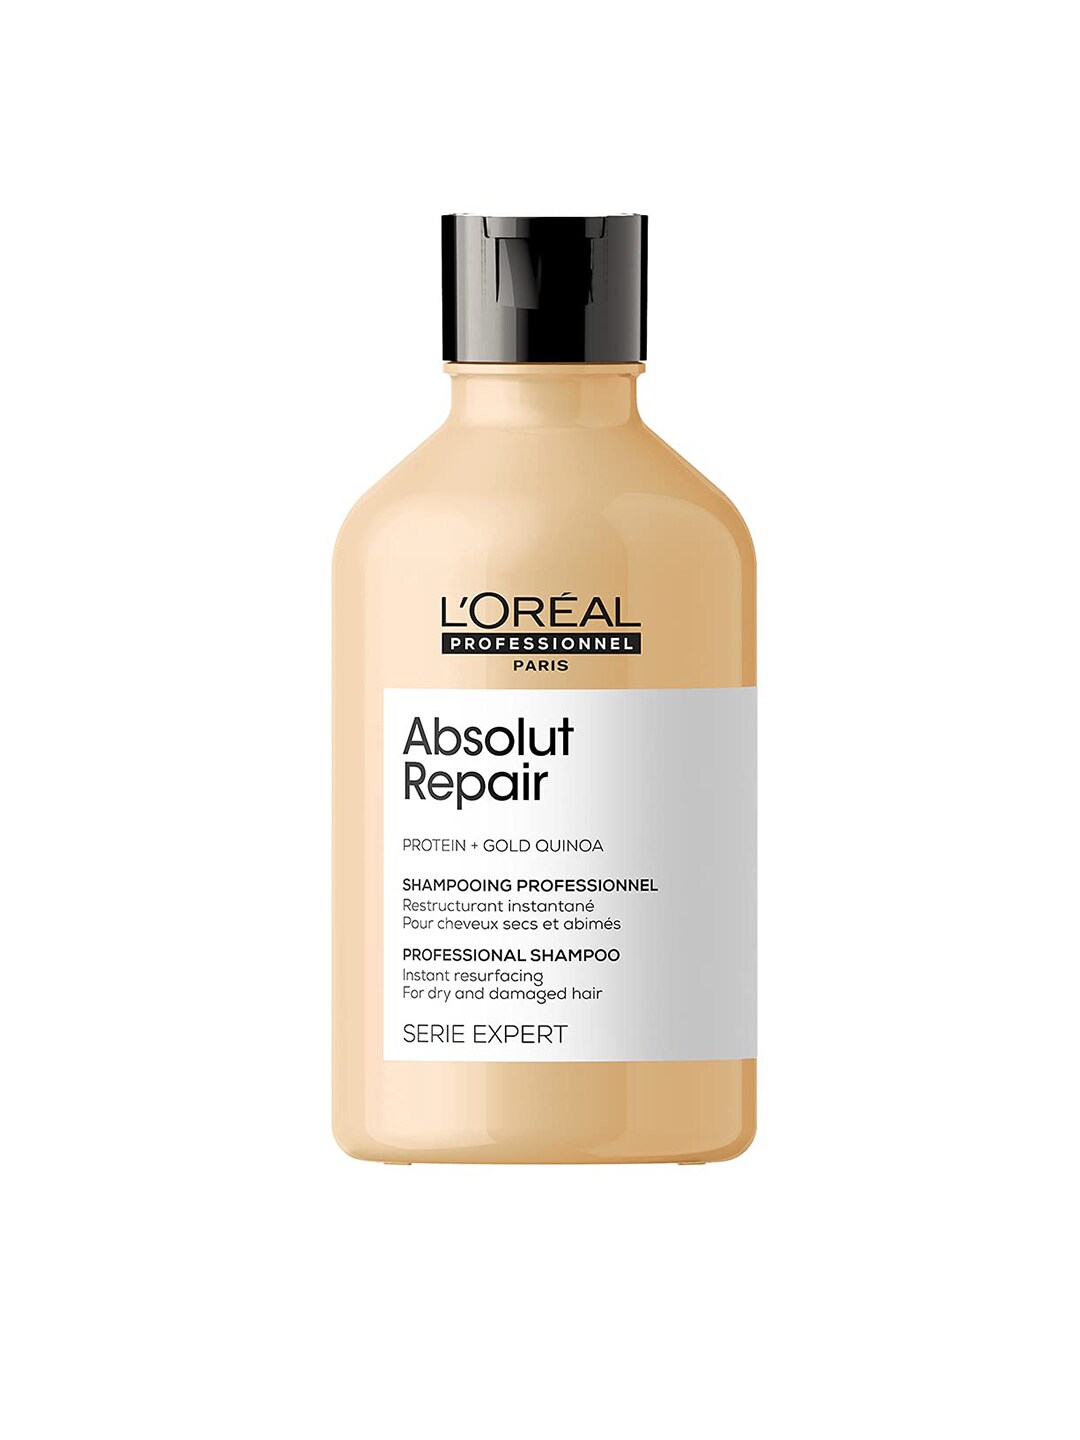 LOreal Professionnel Serie Expert Absolut Repair Shampoo - 300 ml Price in India